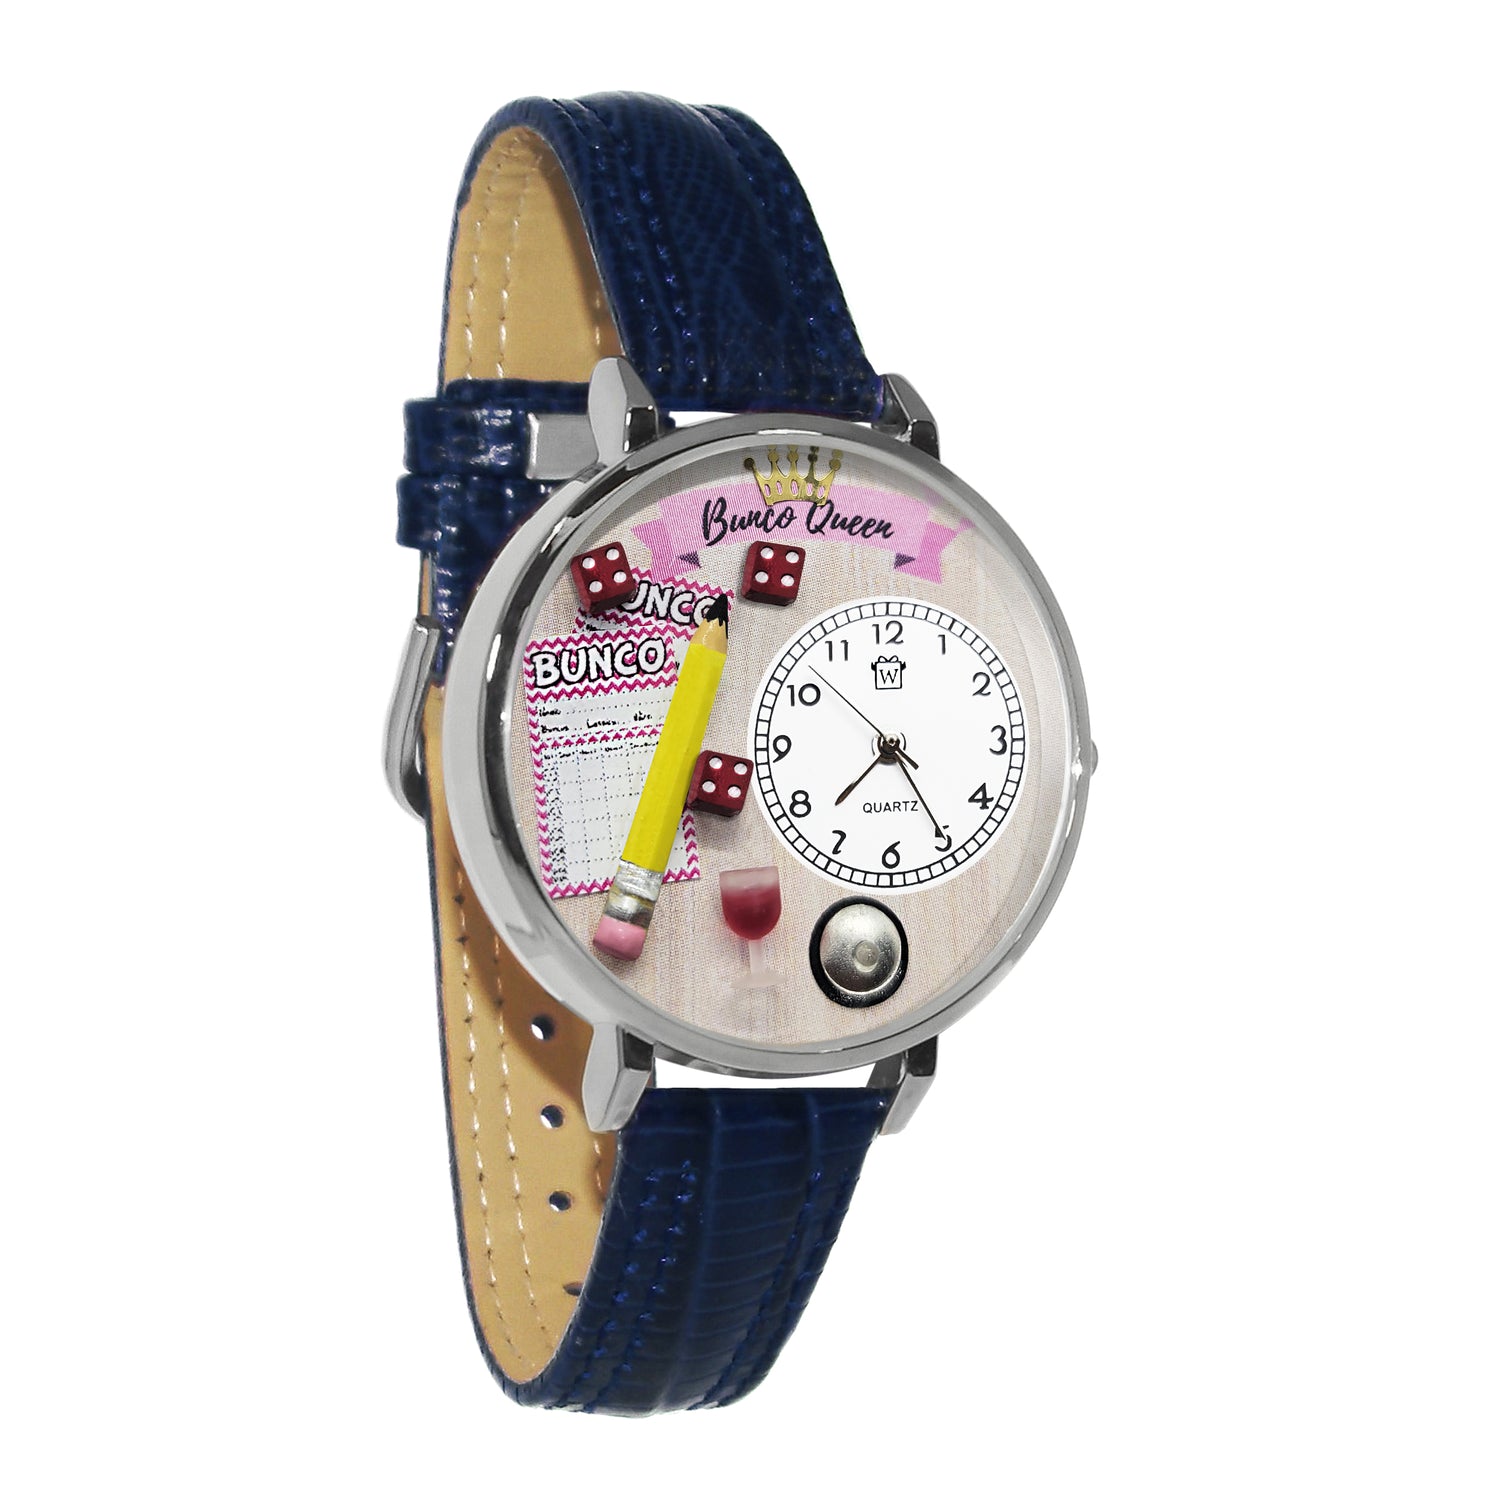 Whimsical Gifts | Bunco Queen 3D Watch Large Style | Handmade in USA | Hobbies & Special Interests | Casino | Gaming | Game Night | Novelty Unique Fun Miniatures Gift | Silver Finish Navy Blue Leather Watch Band